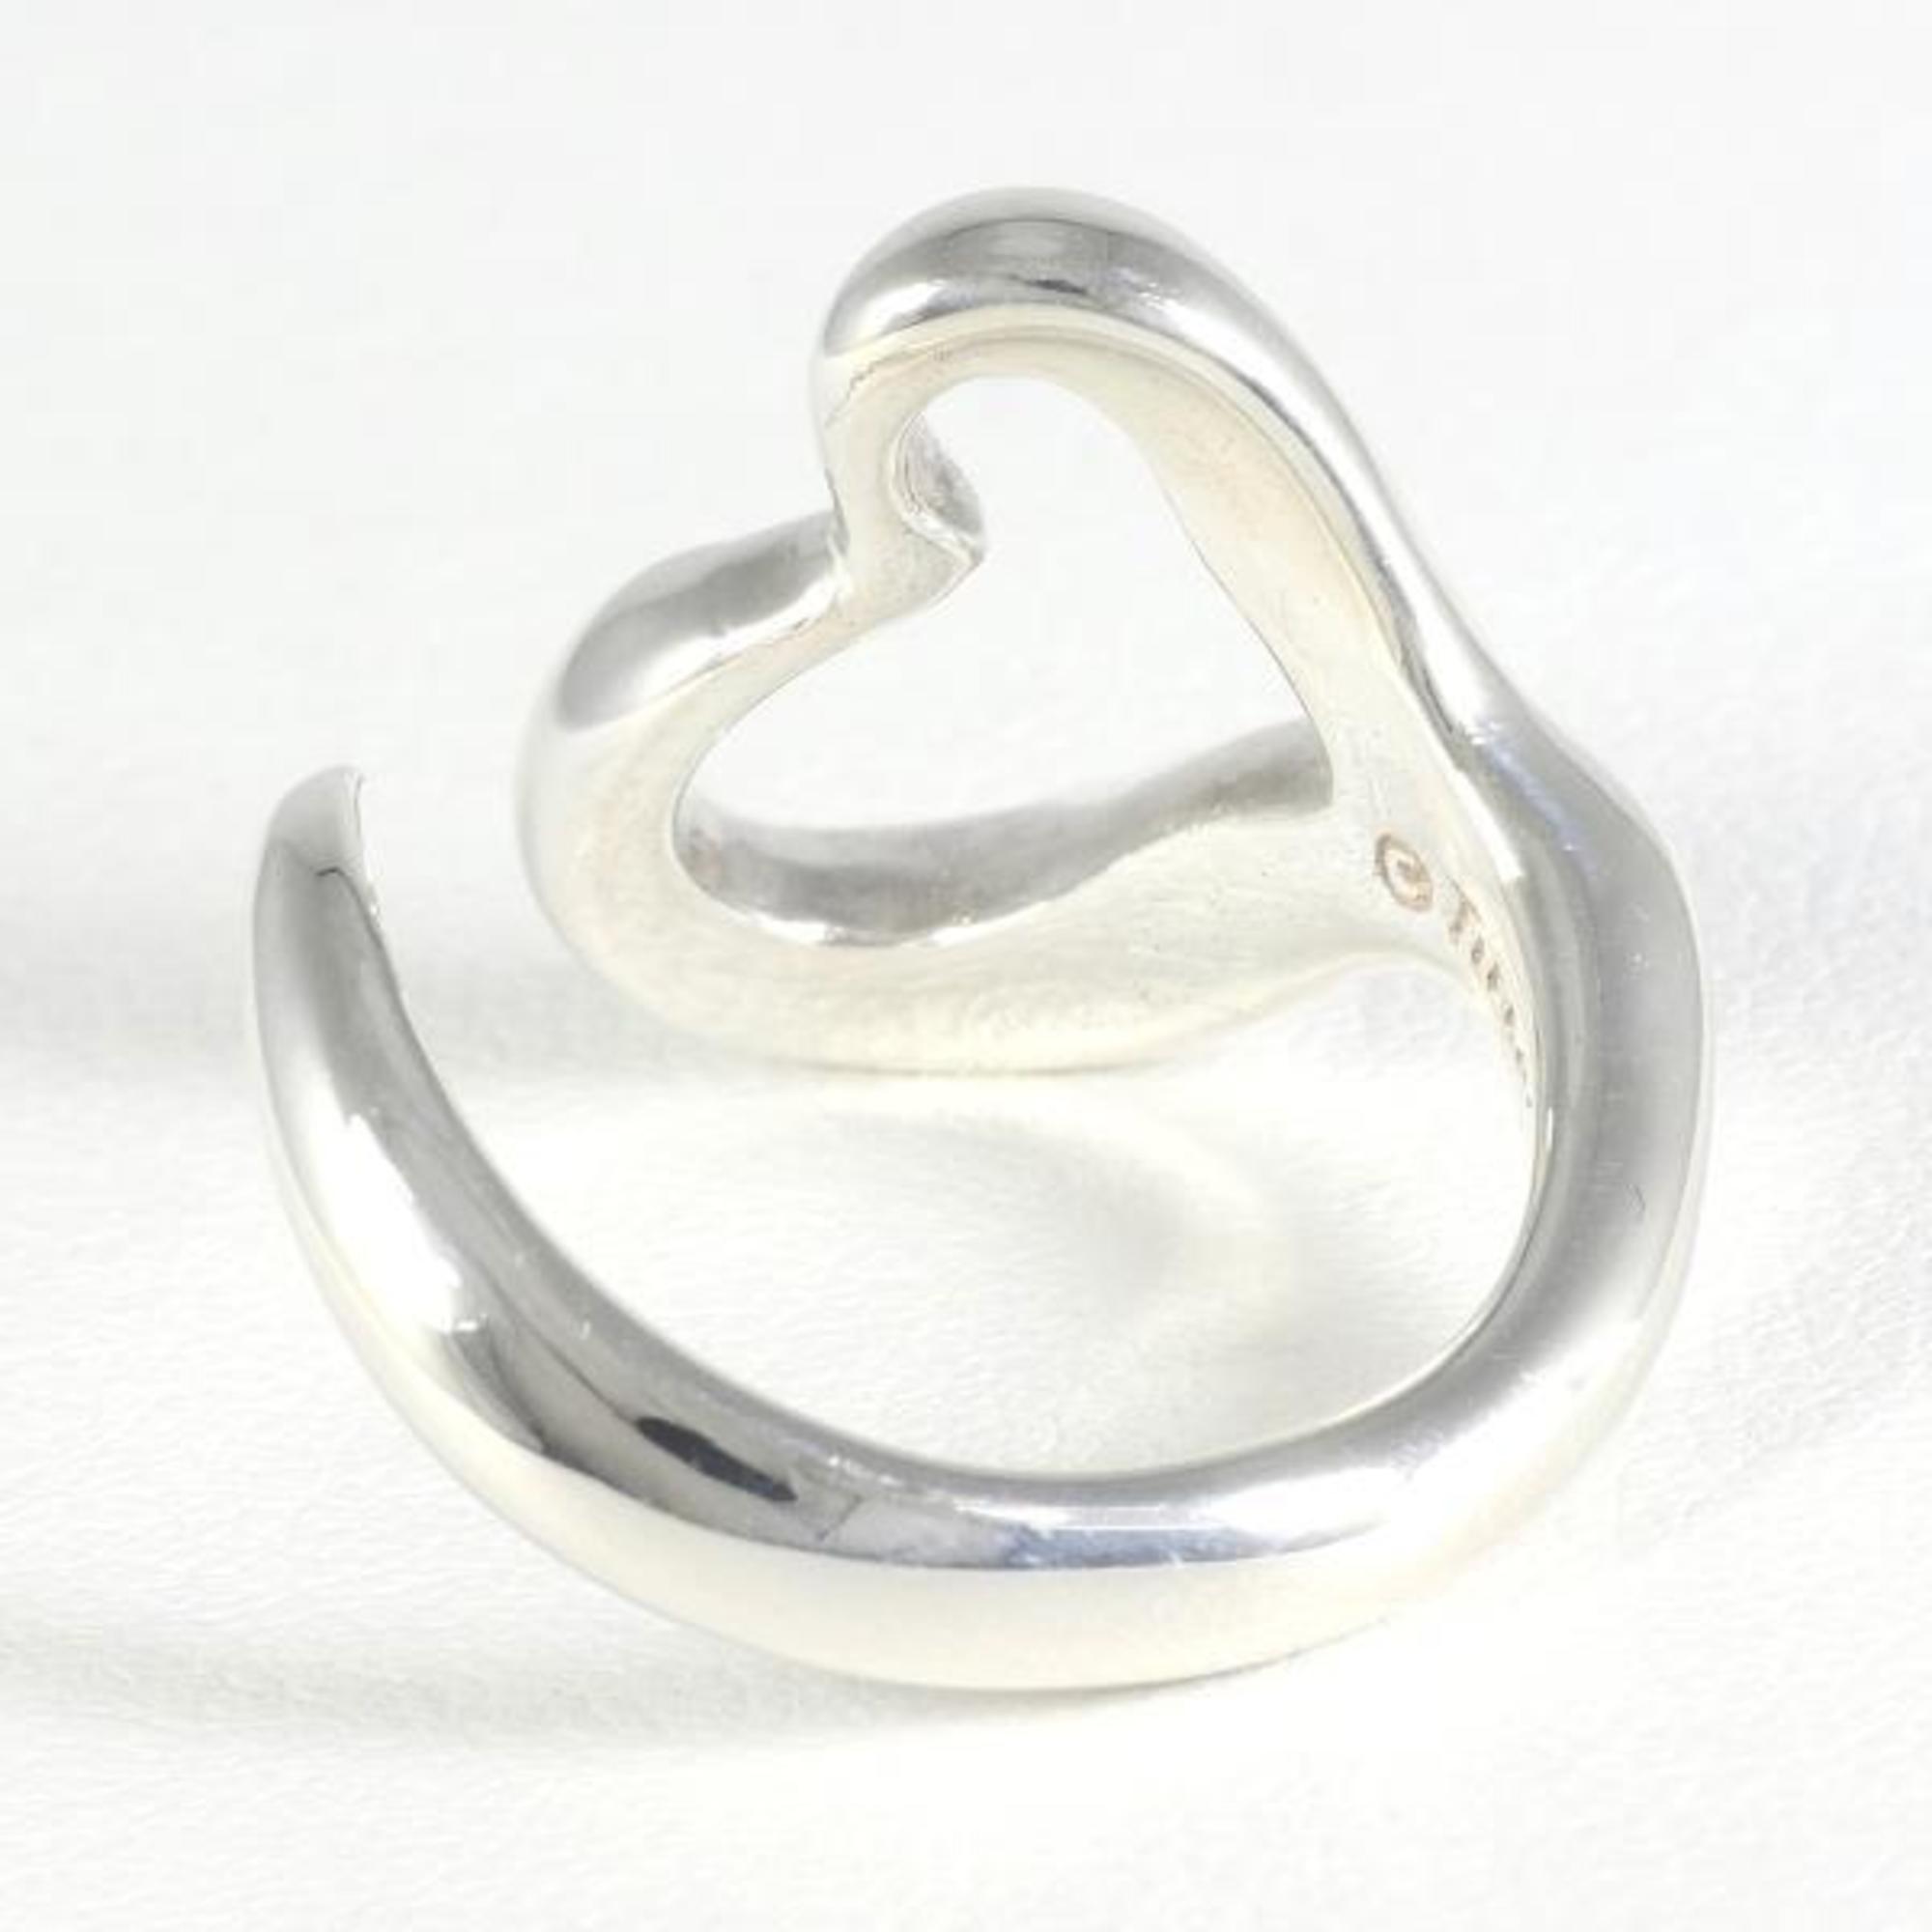 Tiffany Heart Silver Ring Total weight approx. 5.1g